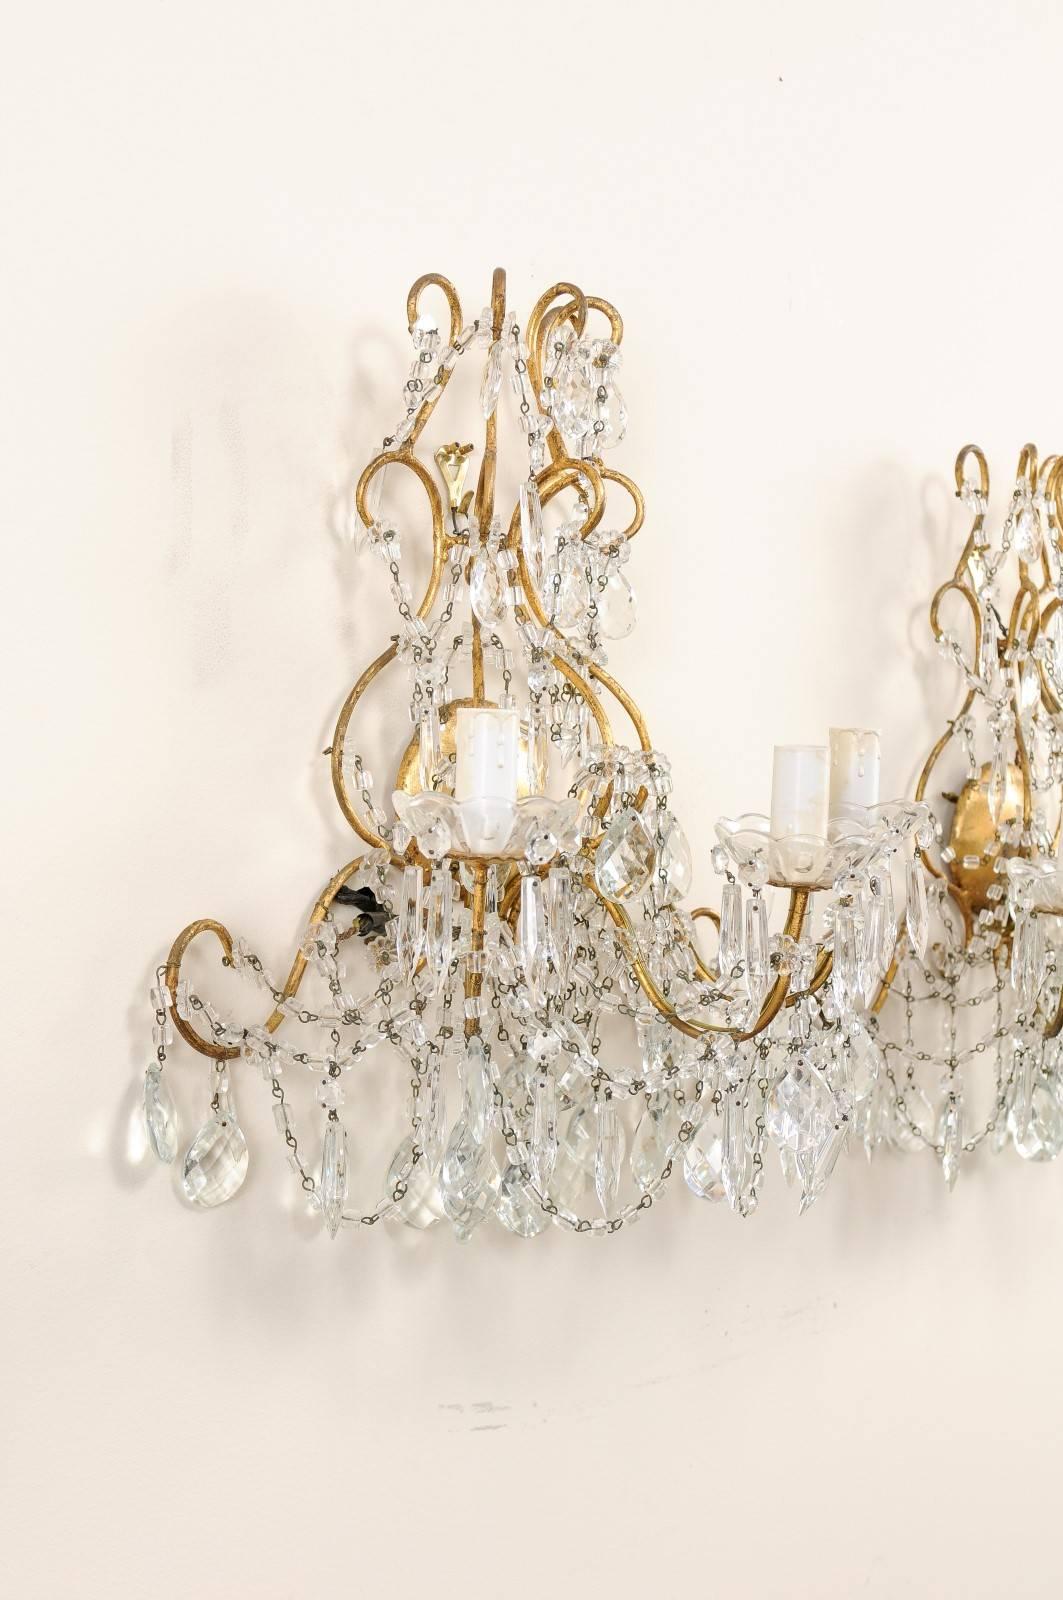 20th Century Italian Pair of Ornately Decorated Crystal & Gilded Metal Three-Light Sconces